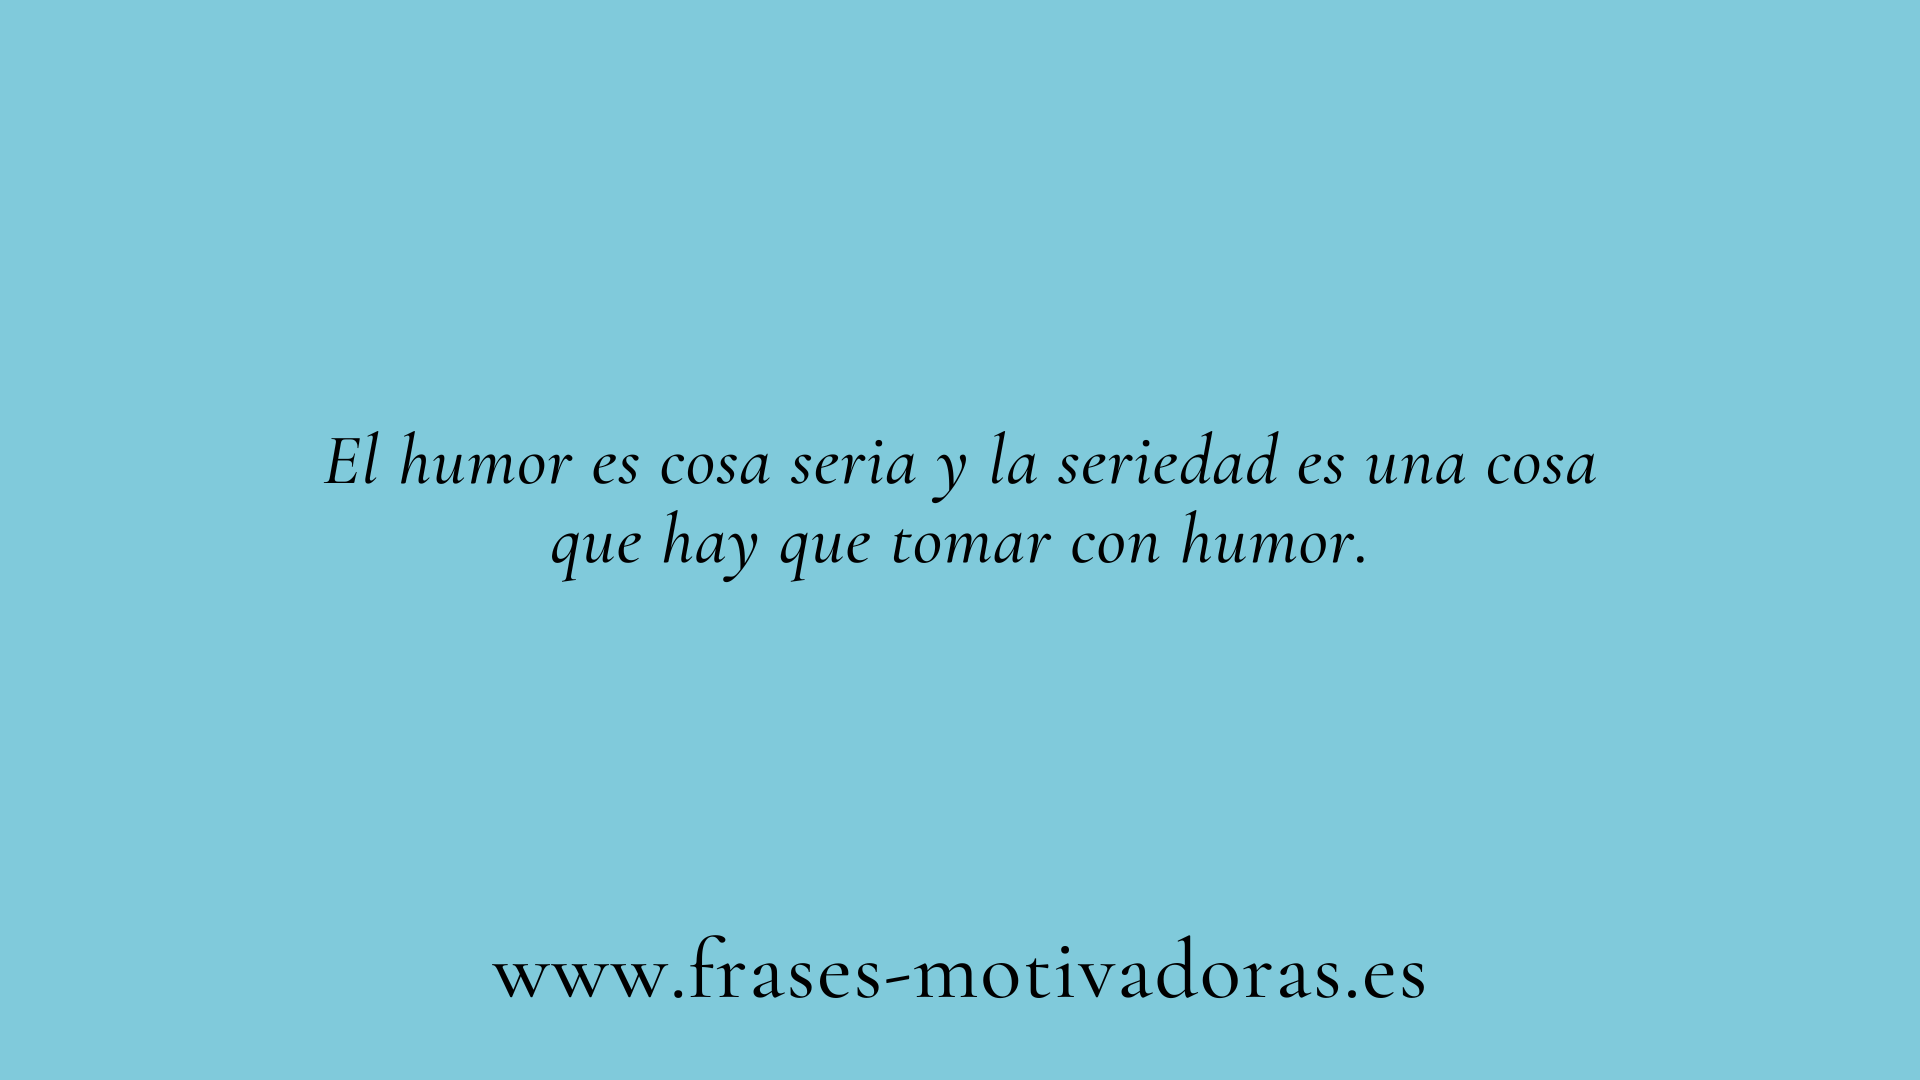 Frases de Cantinflas